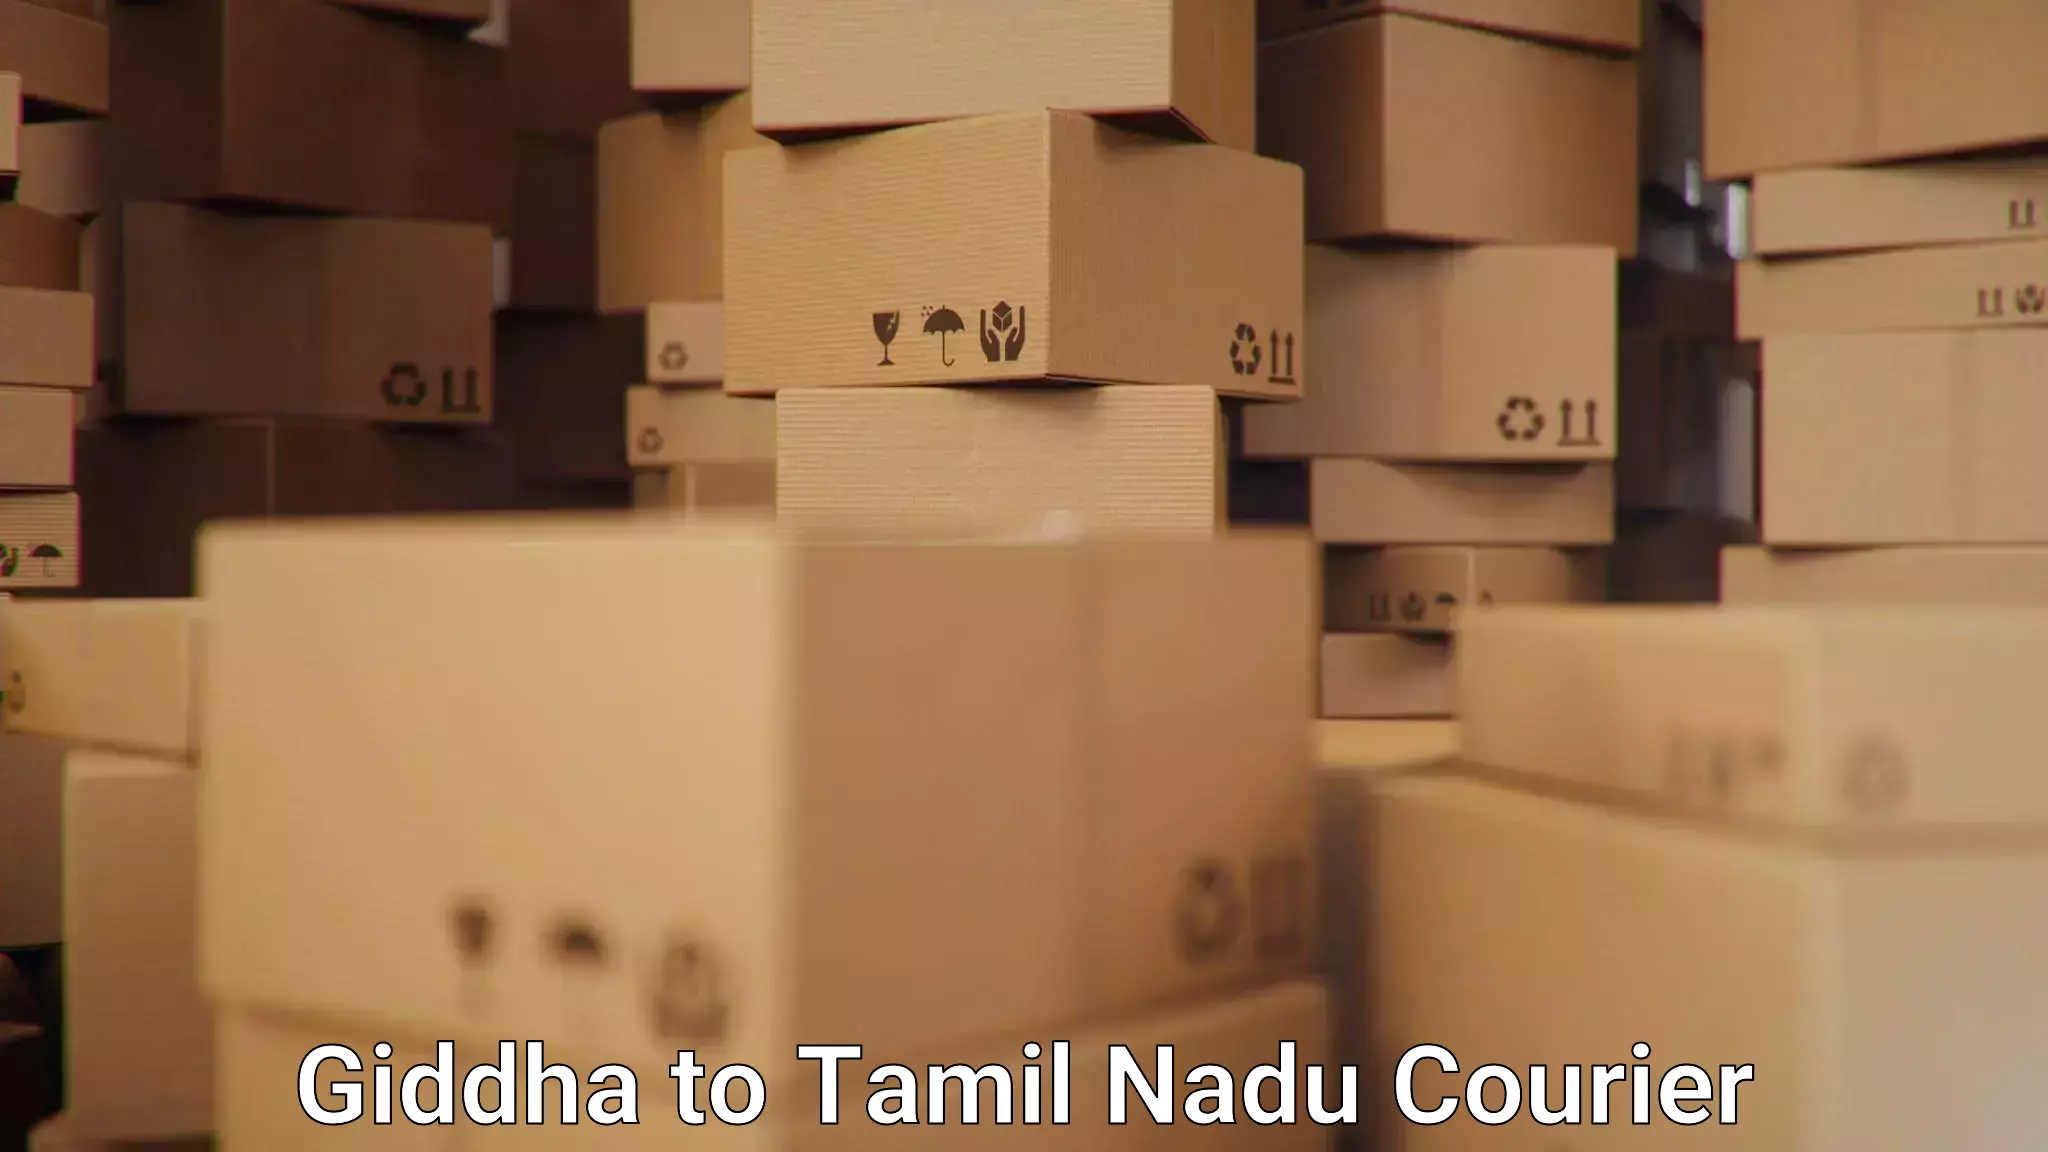 Automated parcel services Giddha to Tamil Nadu